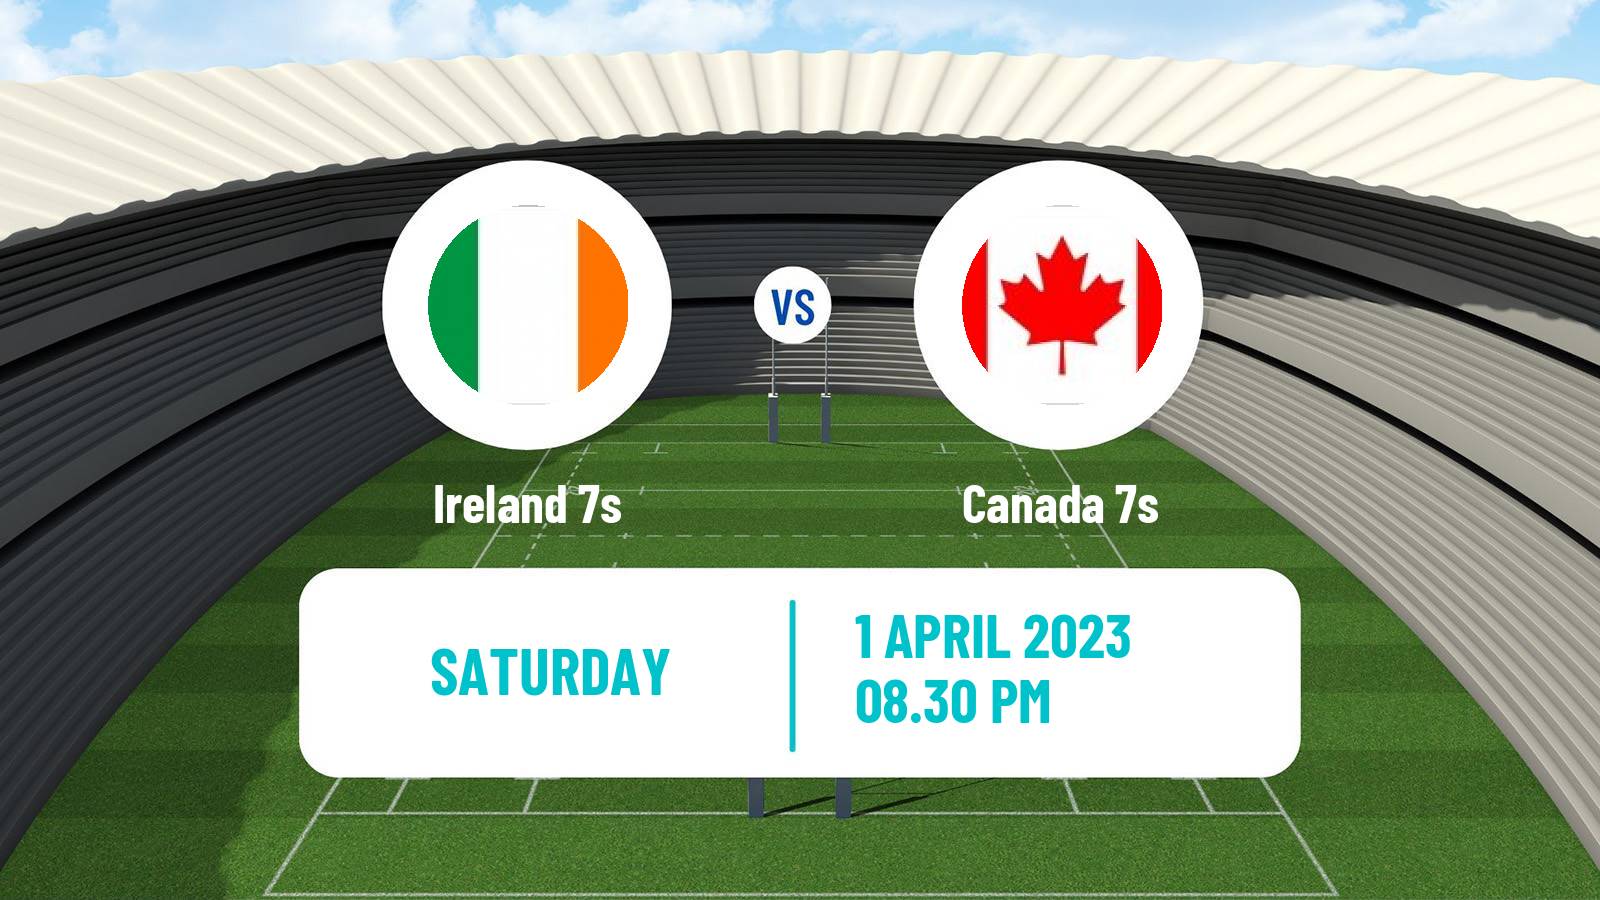 Rugby union Sevens World Series - Hong Kong 2 Ireland 7s - Canada 7s